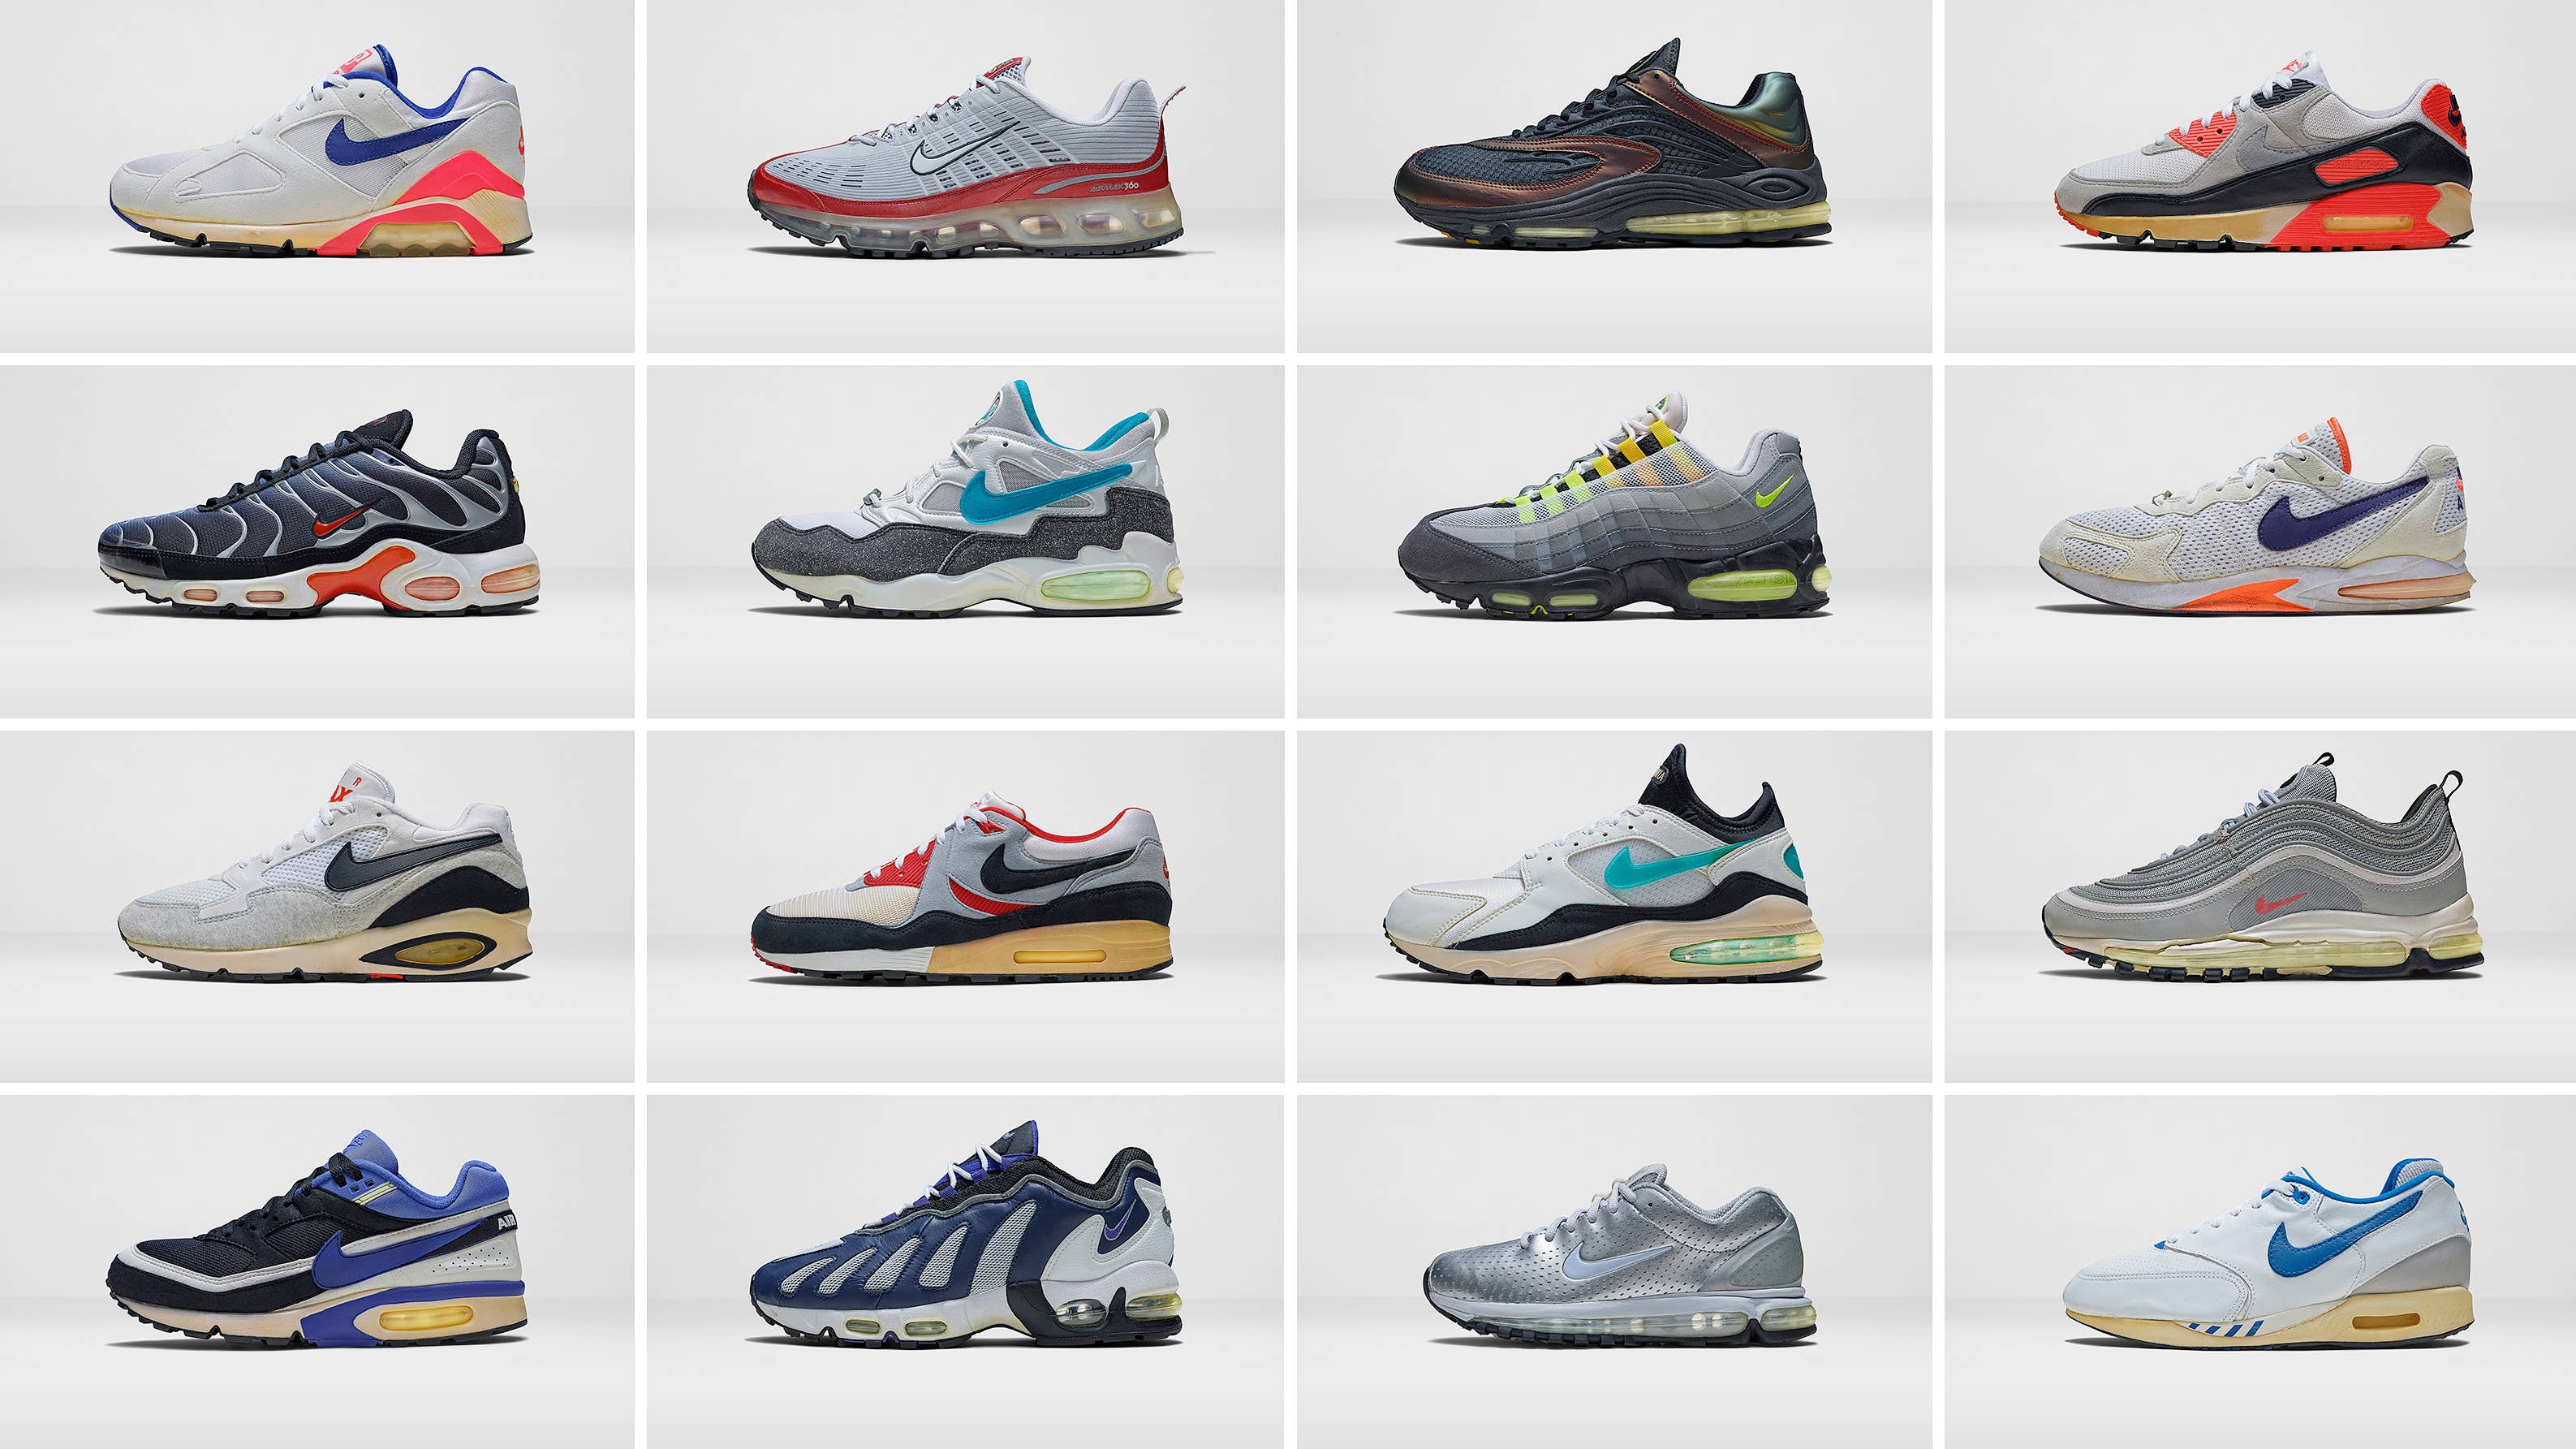 There Wouldn't Be Nike Without Air Max